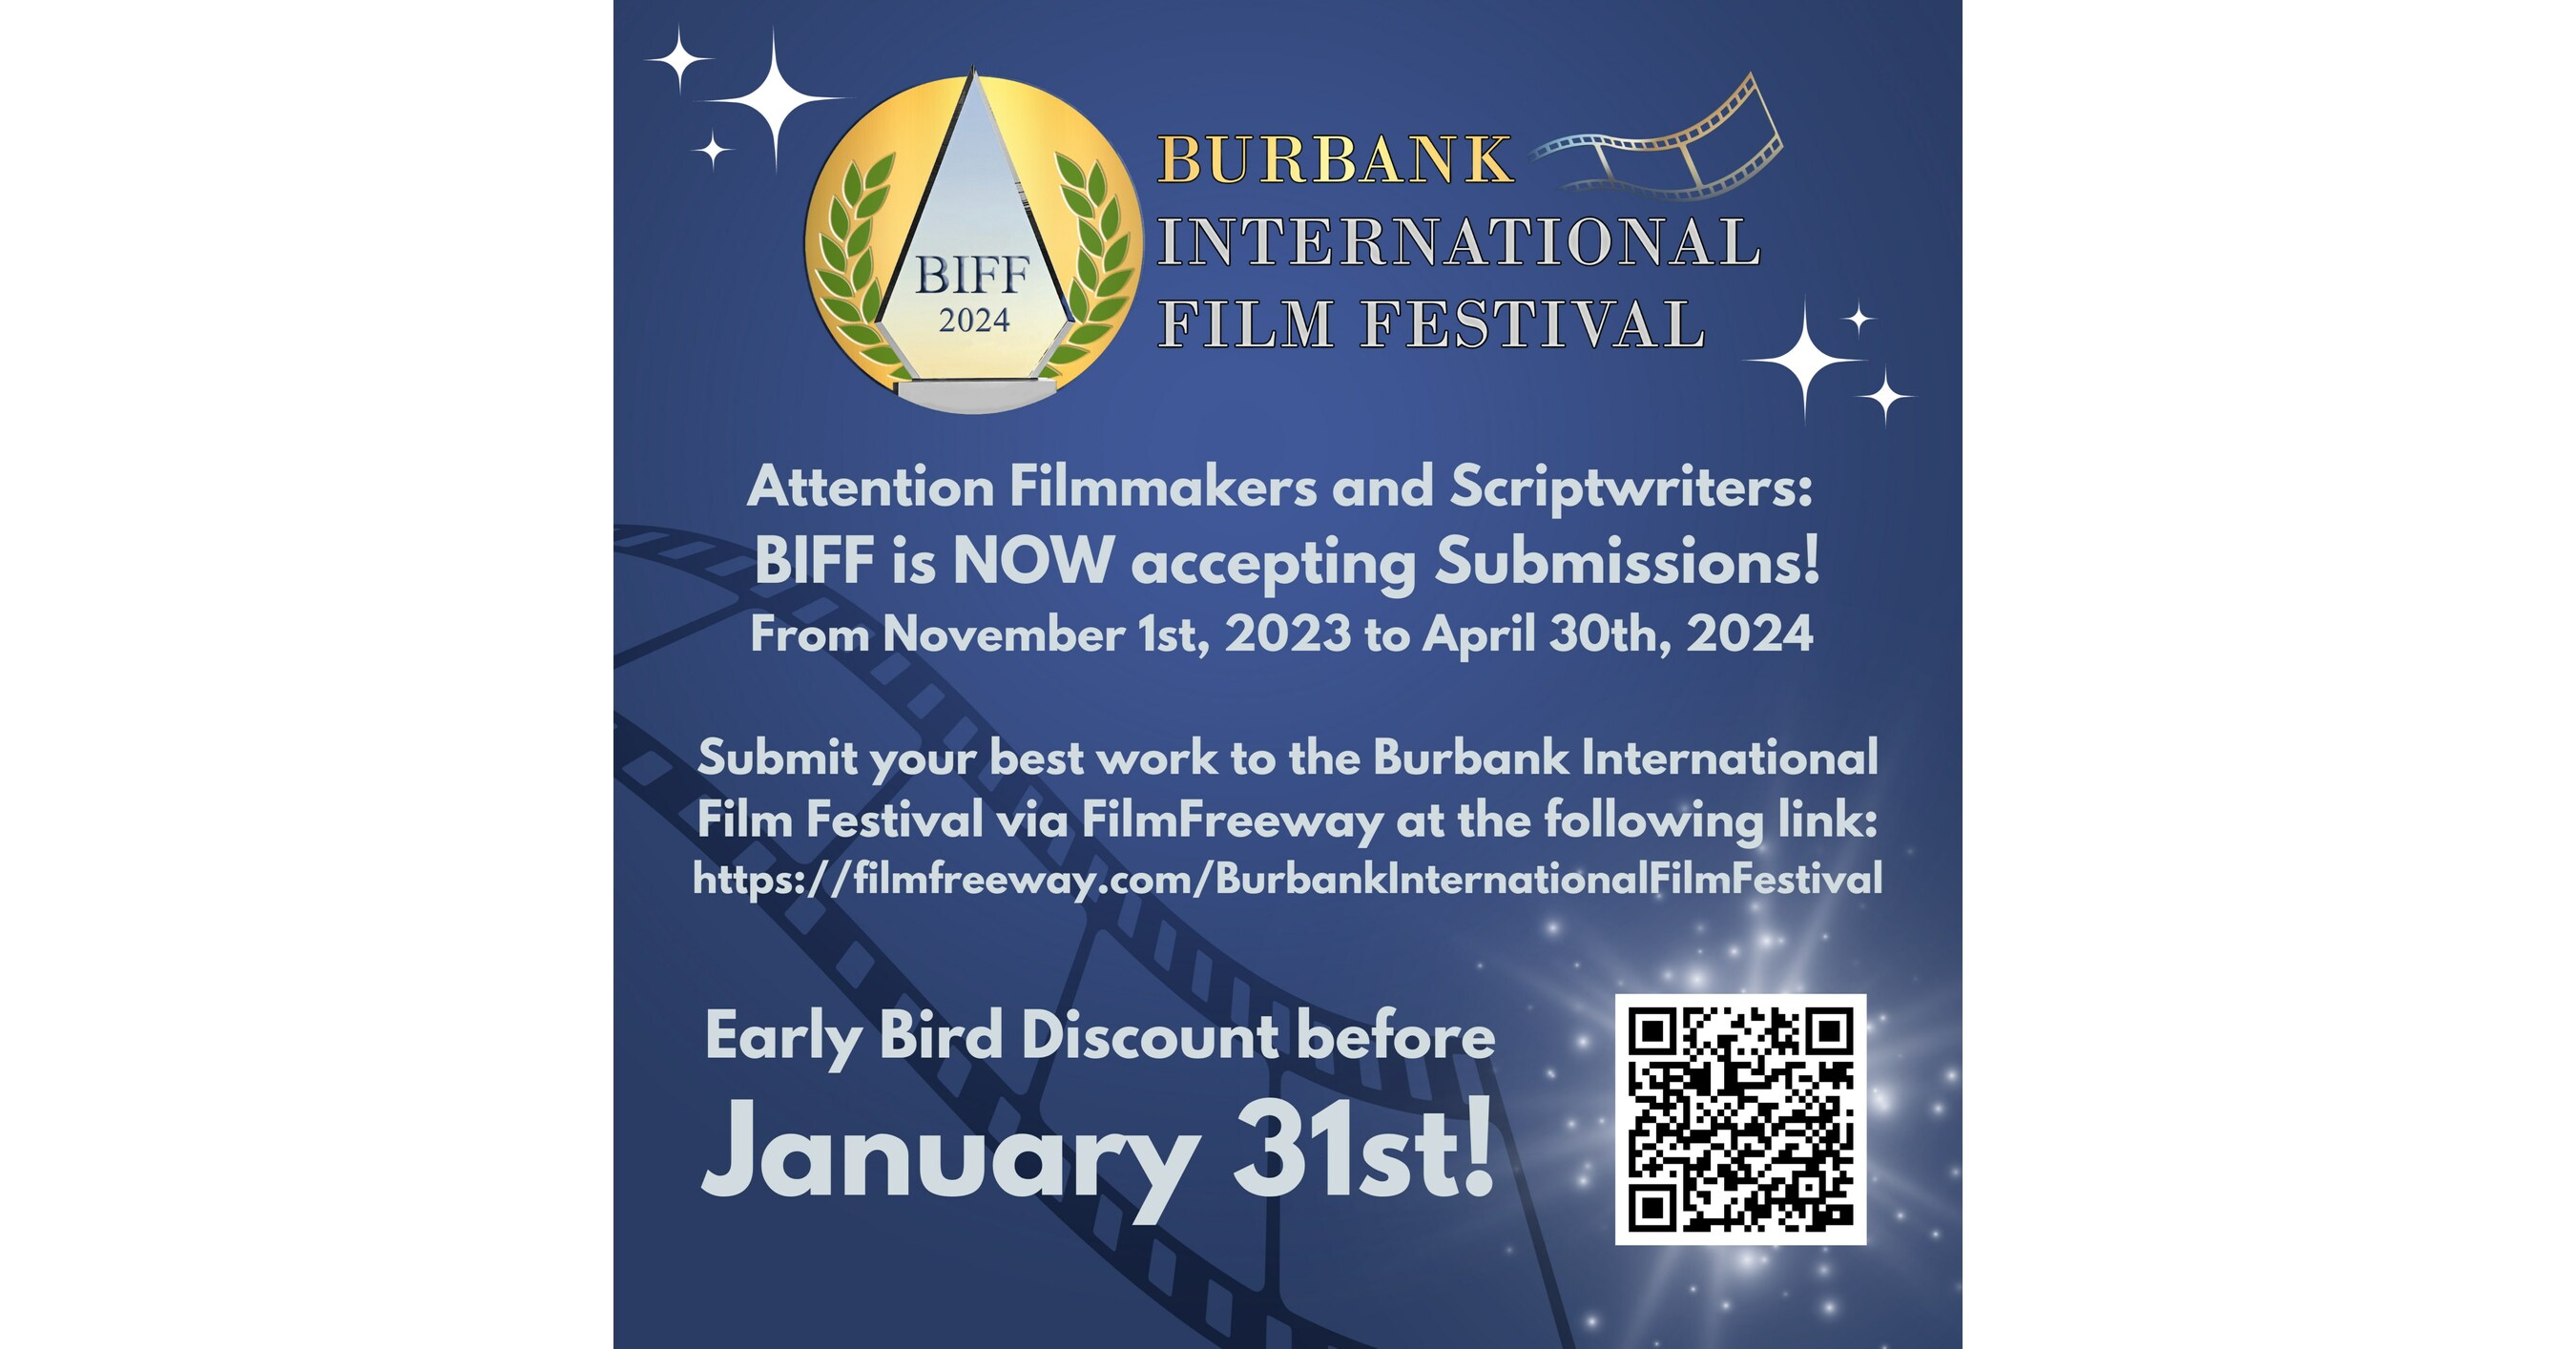 Burbank Film Festival Announces 2024 Dates, Now Accepting Submissions